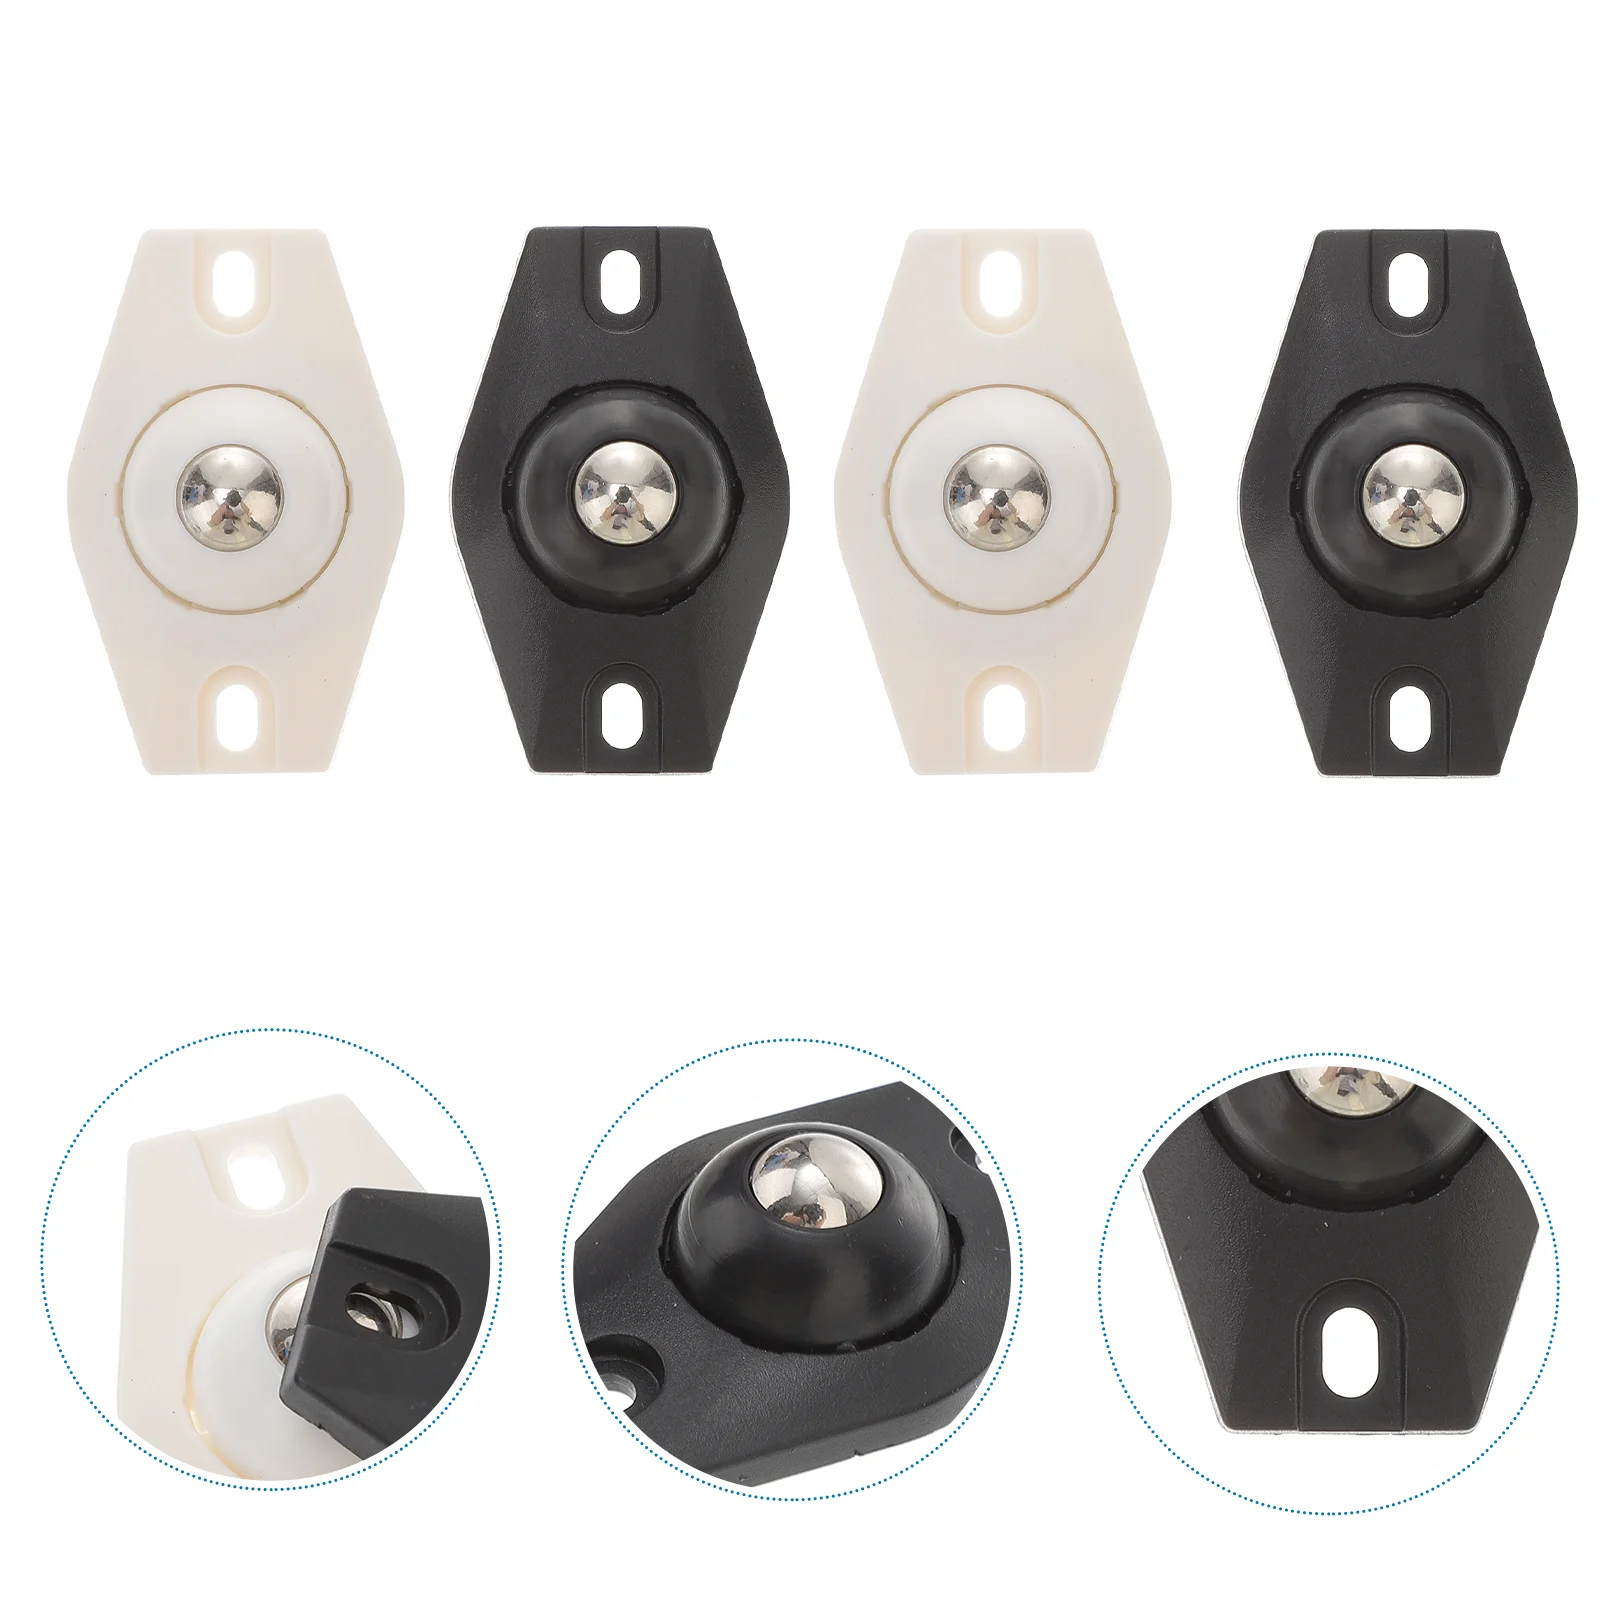 

Wheels Adhesive Self Swivel Mini Caster Pulleycasters Furniture Rotation Paste Wheel Degree Castor Sticky Roller Steel